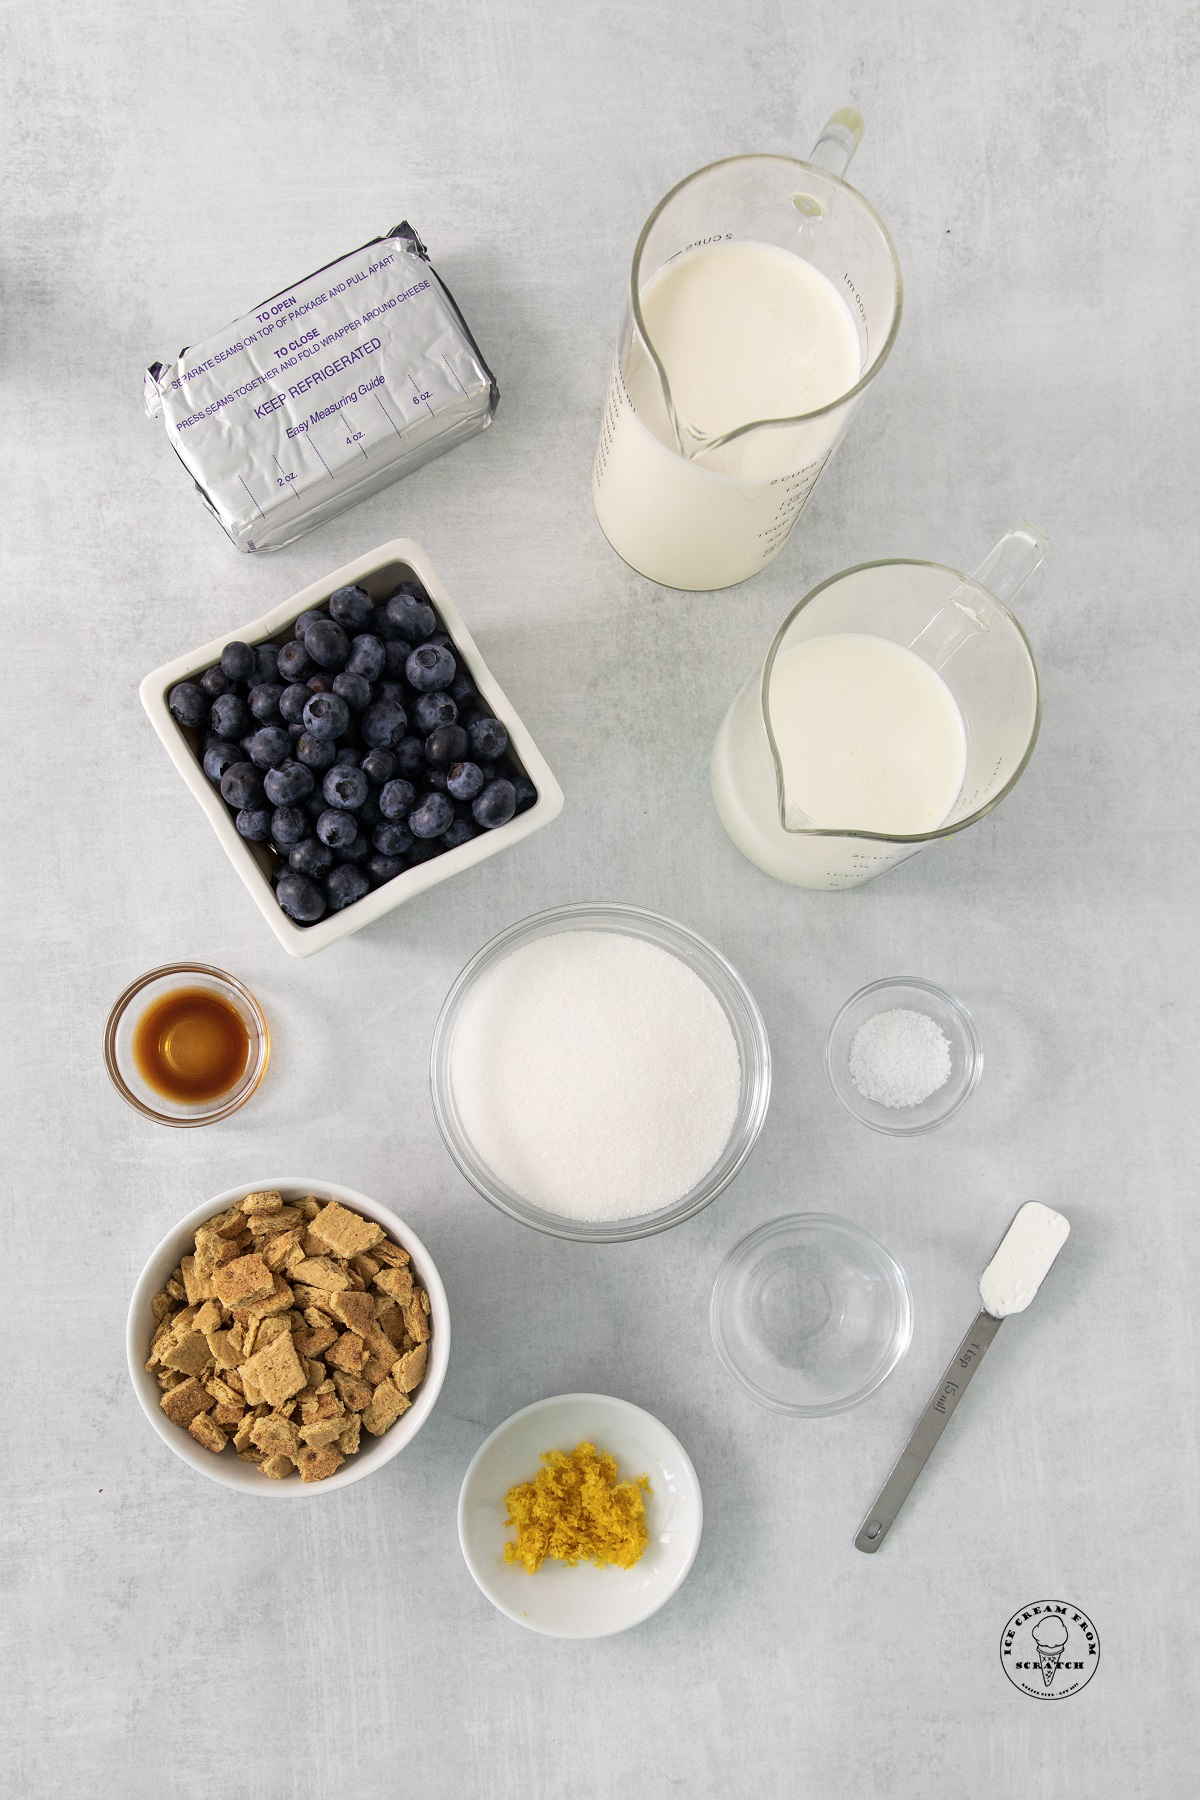 The ingredients for homemade blueberry cheesecake ice cream, all measured and arranged on a counter.